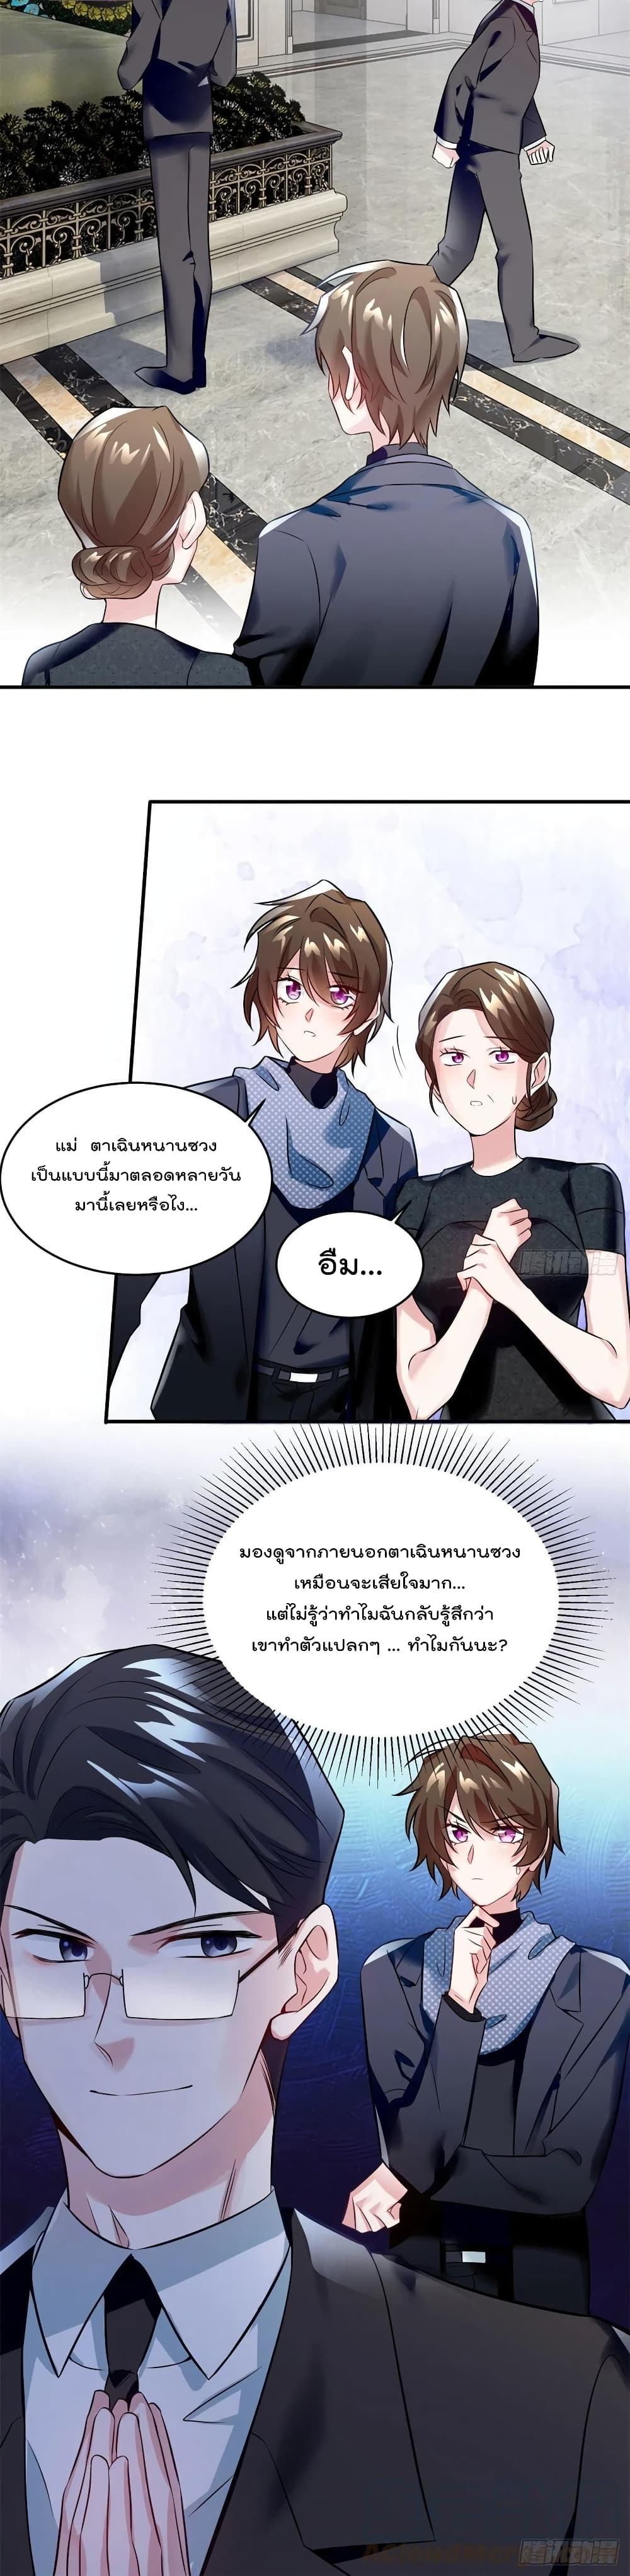 Nancheng waits for the Month to Return 96 แปลไทย